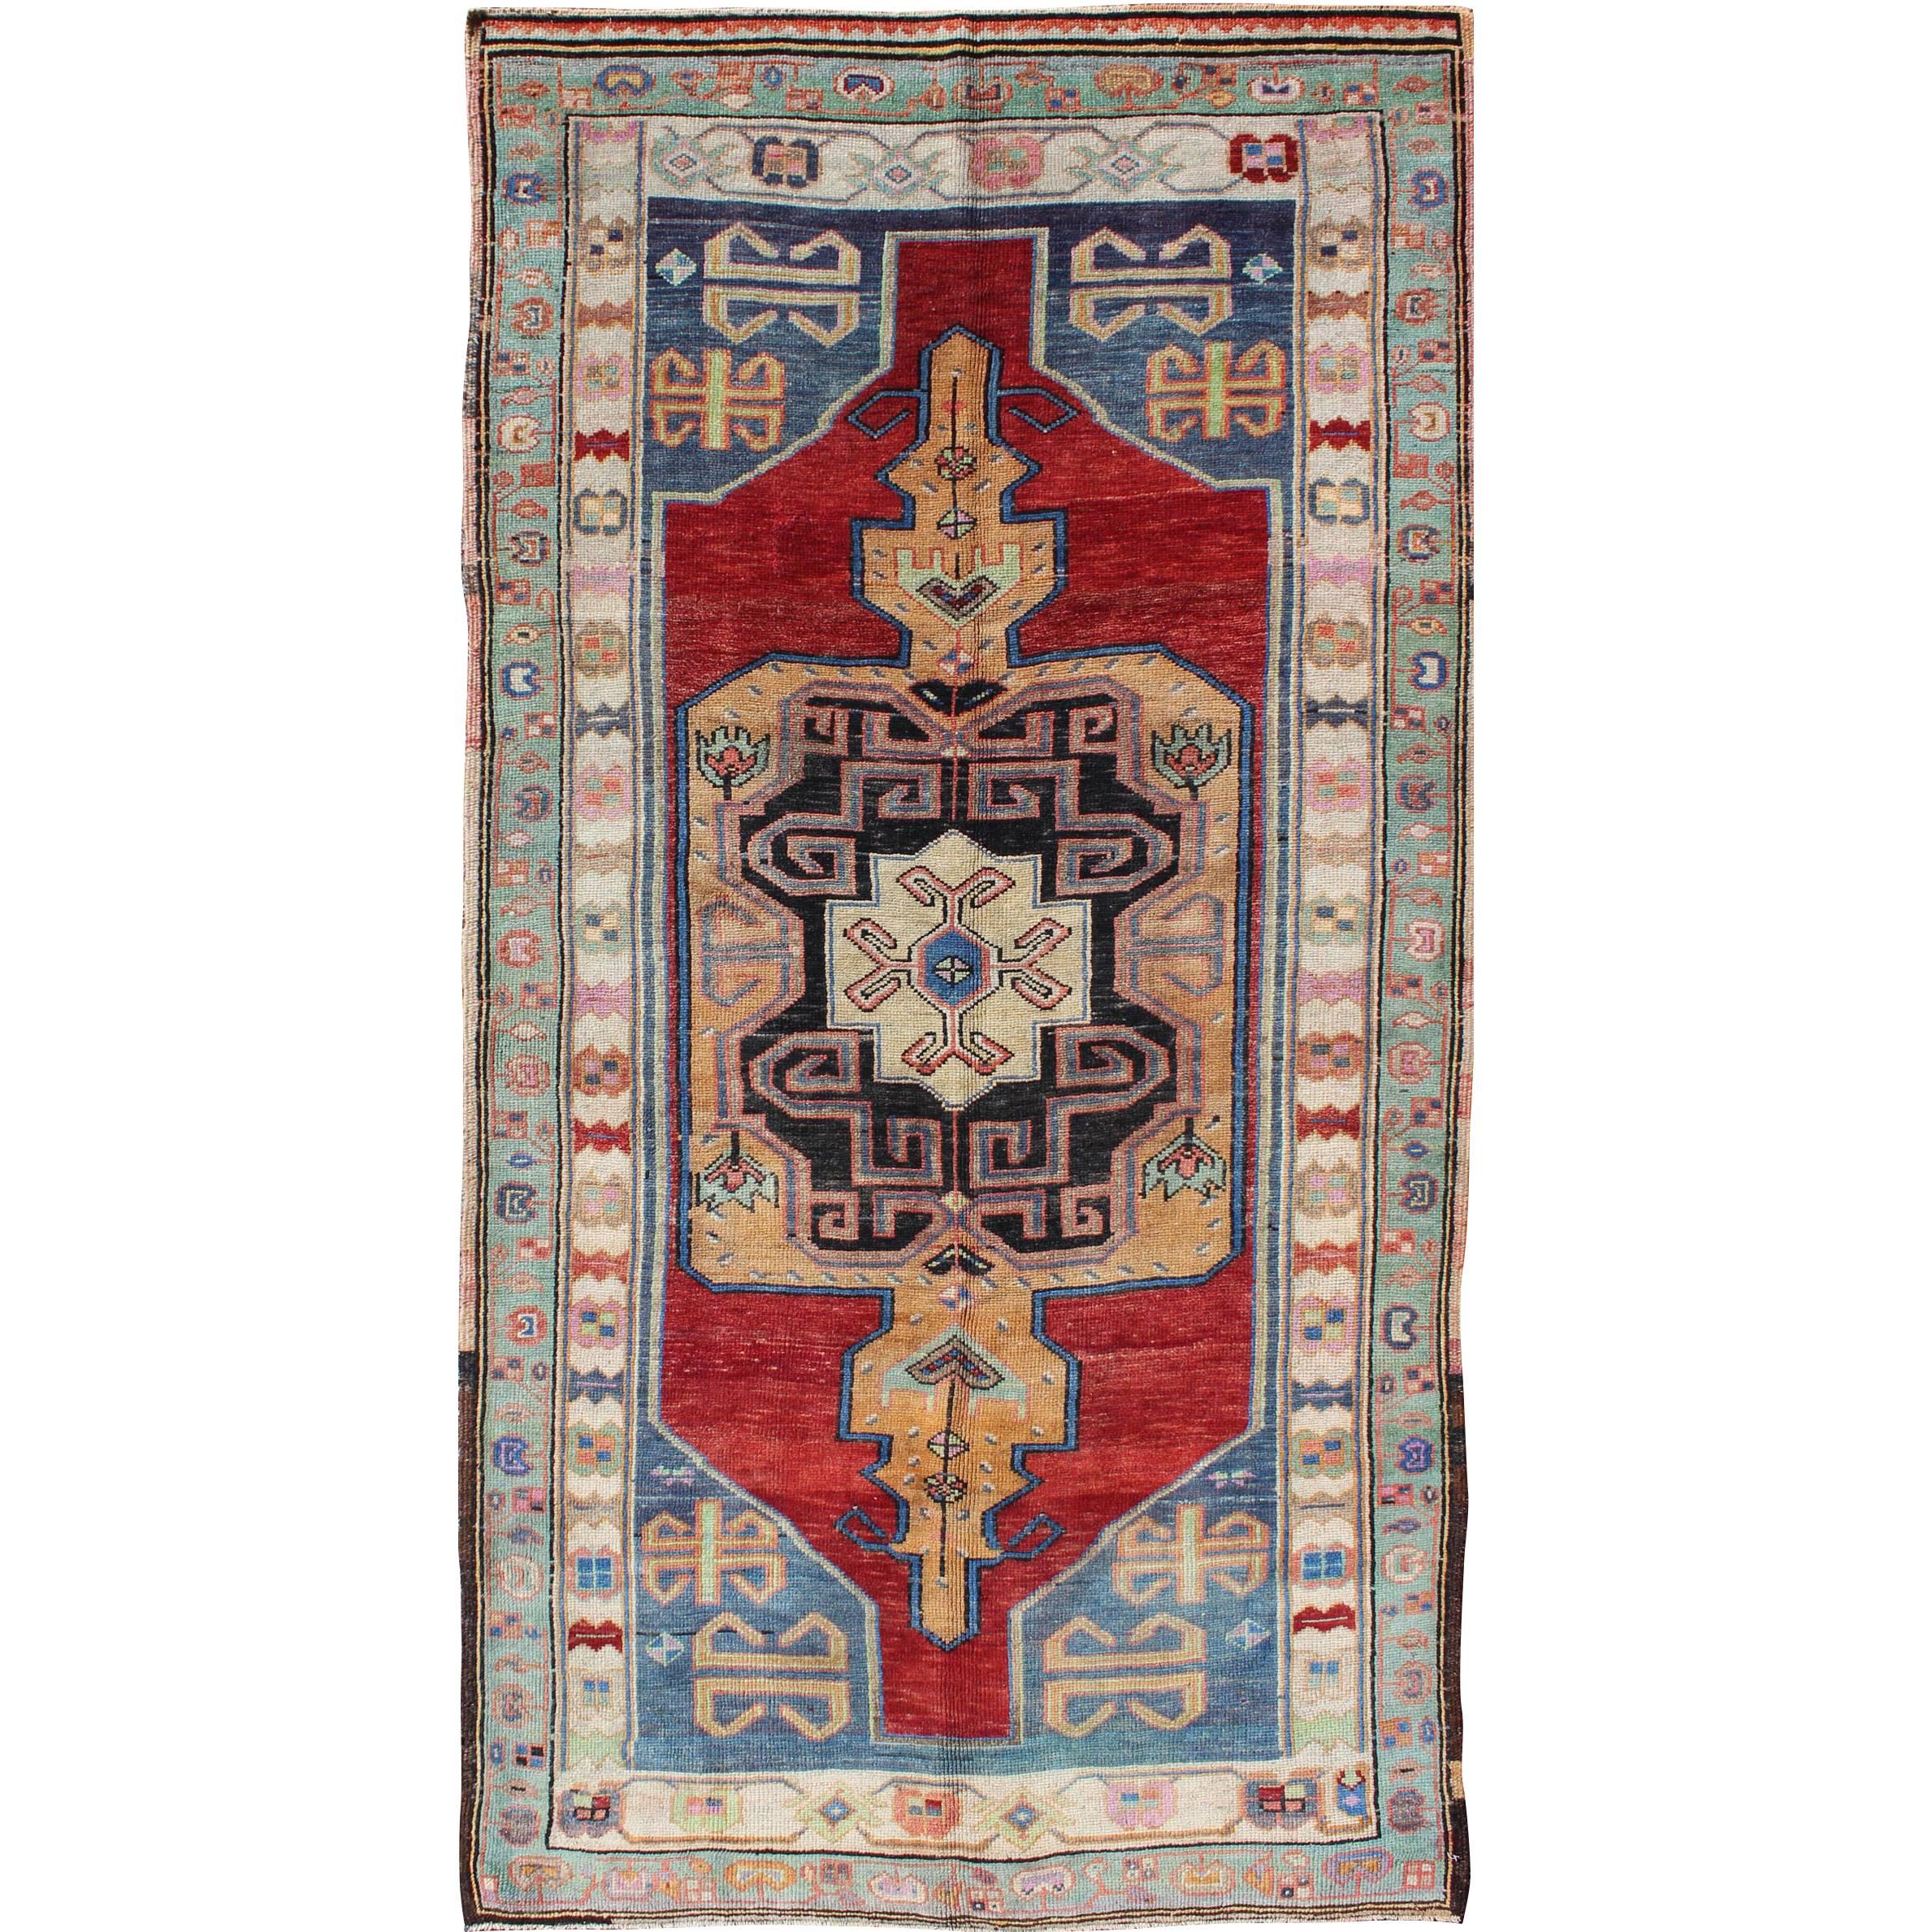 Beautiful Turkish Oushak Rug with Unique Colors and Geometric Design